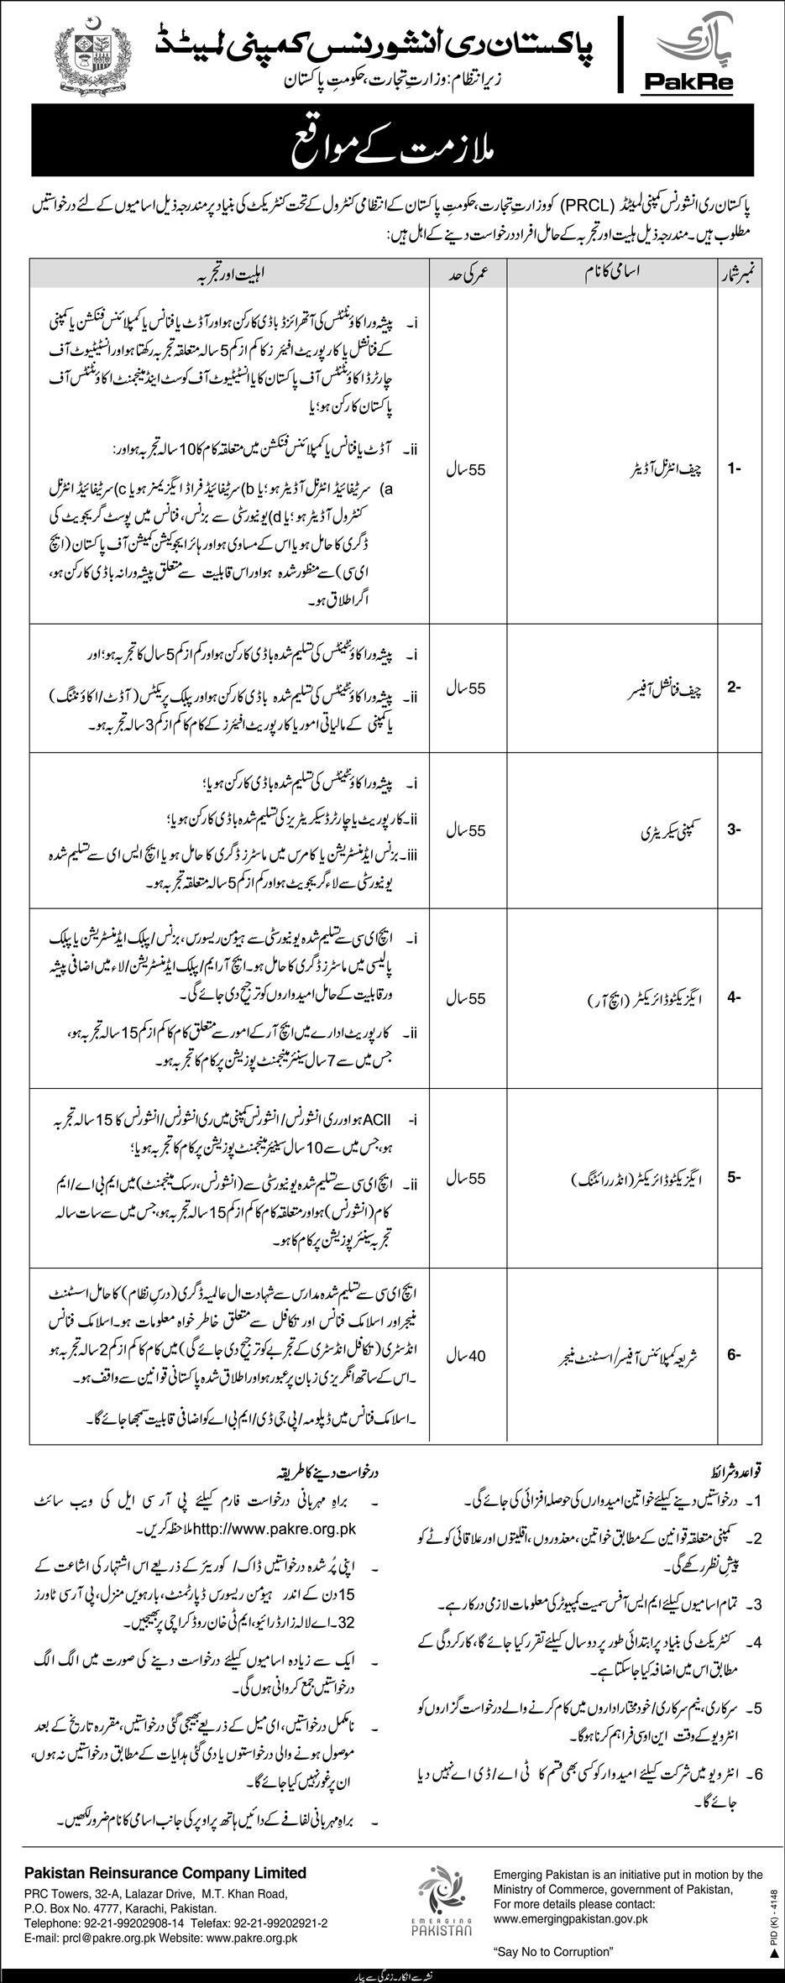 PakRe (PRCL) Jobs 2019 For Shariah Compliance Officers / Assistant Managers, Admin / HR & Management Posts